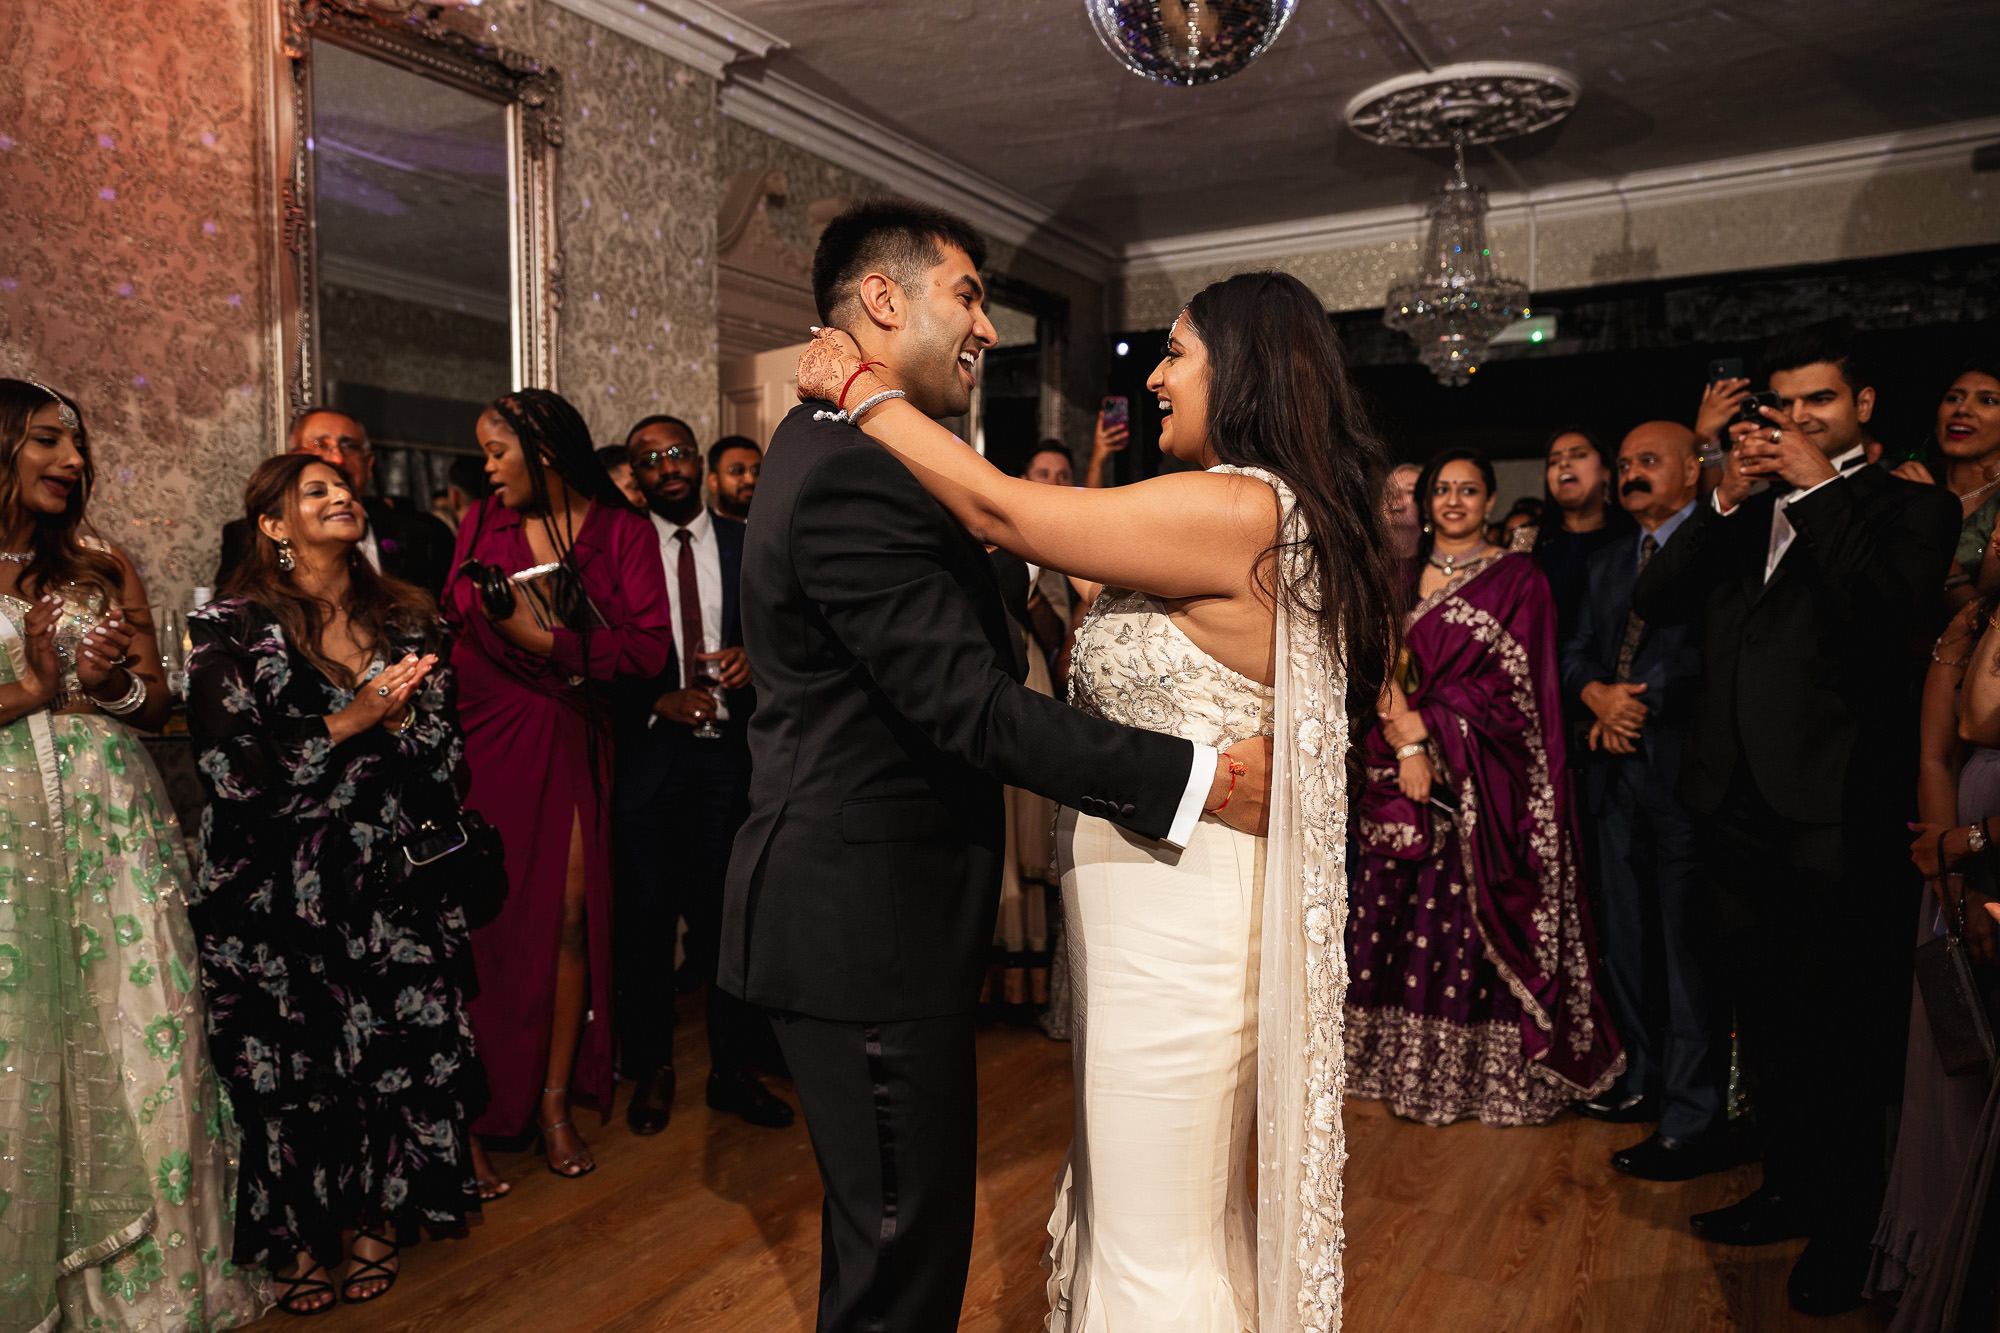 The Grange Country House, Northwood, London, wedding reception, first dance